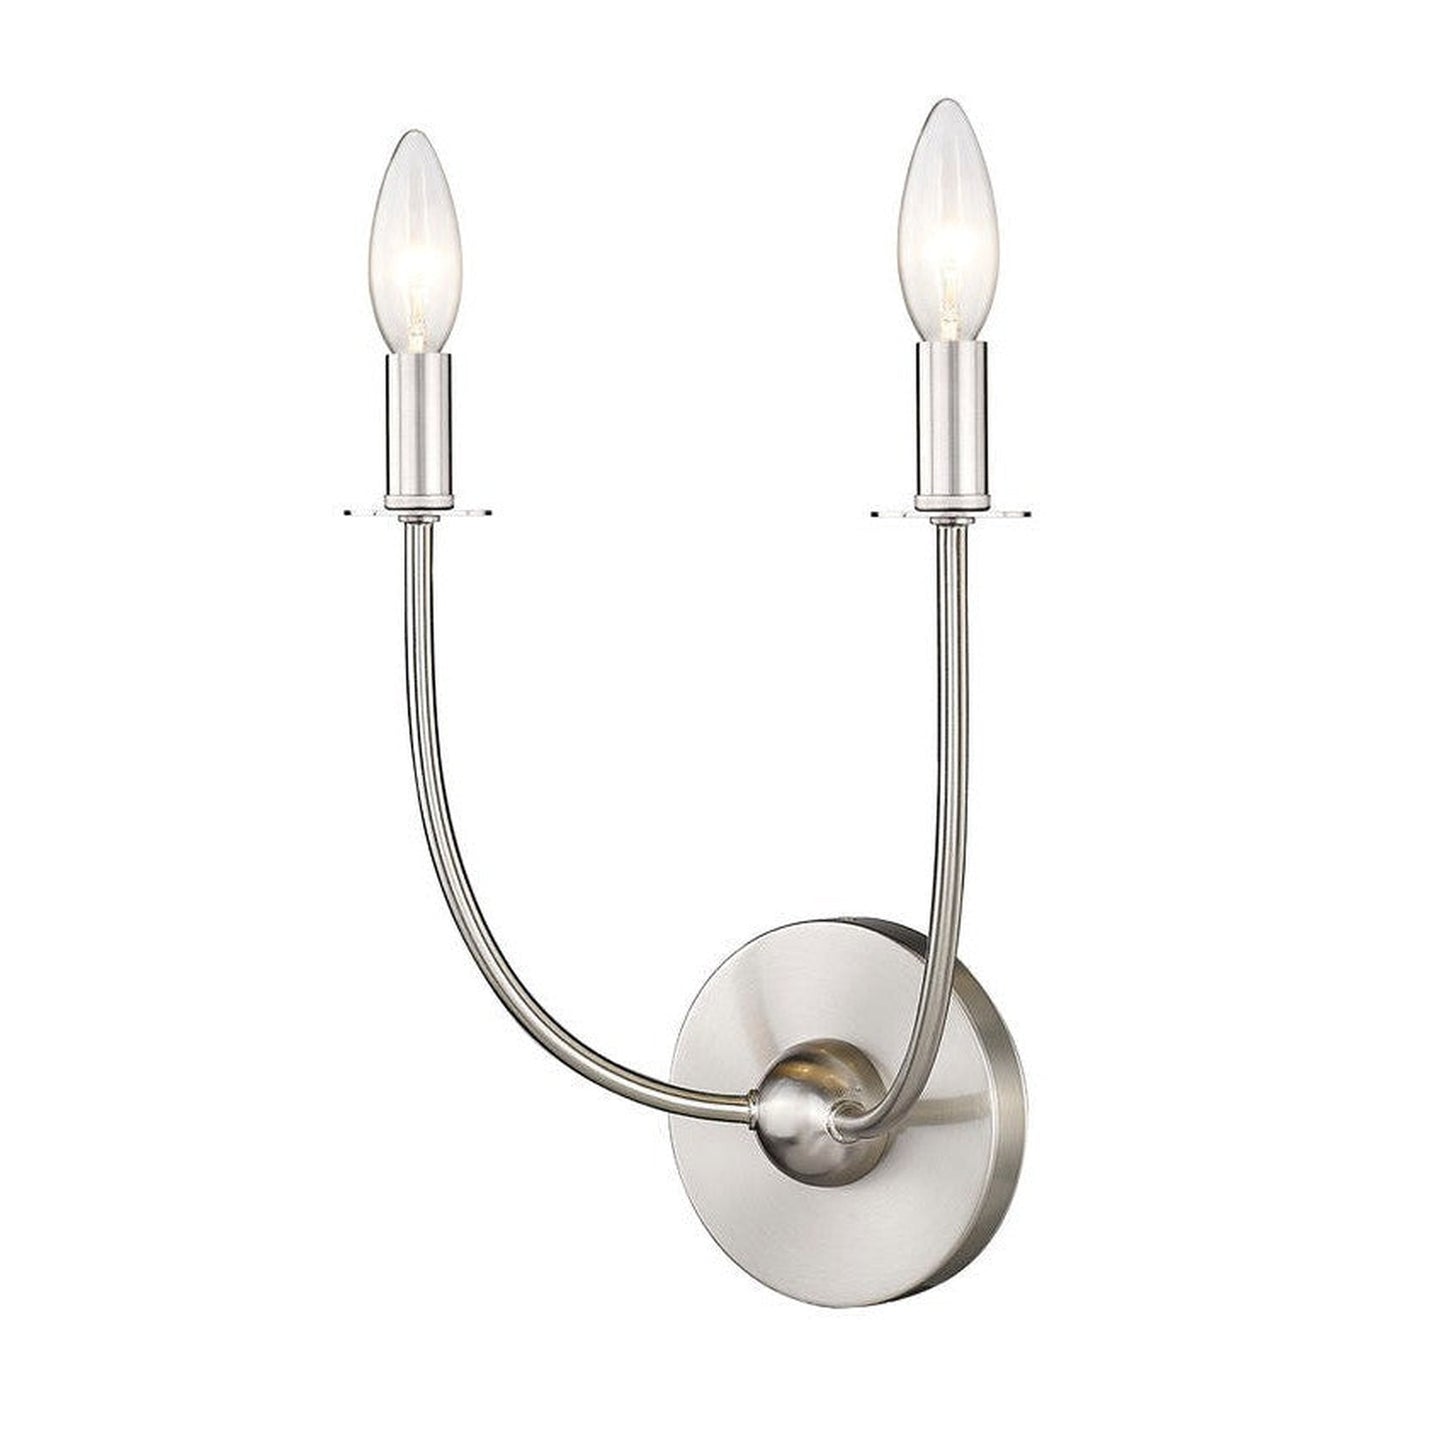 Z-Lite Shannon 13" 2-Light Brushed Nickel and White Fabric Shade Wall Sconce